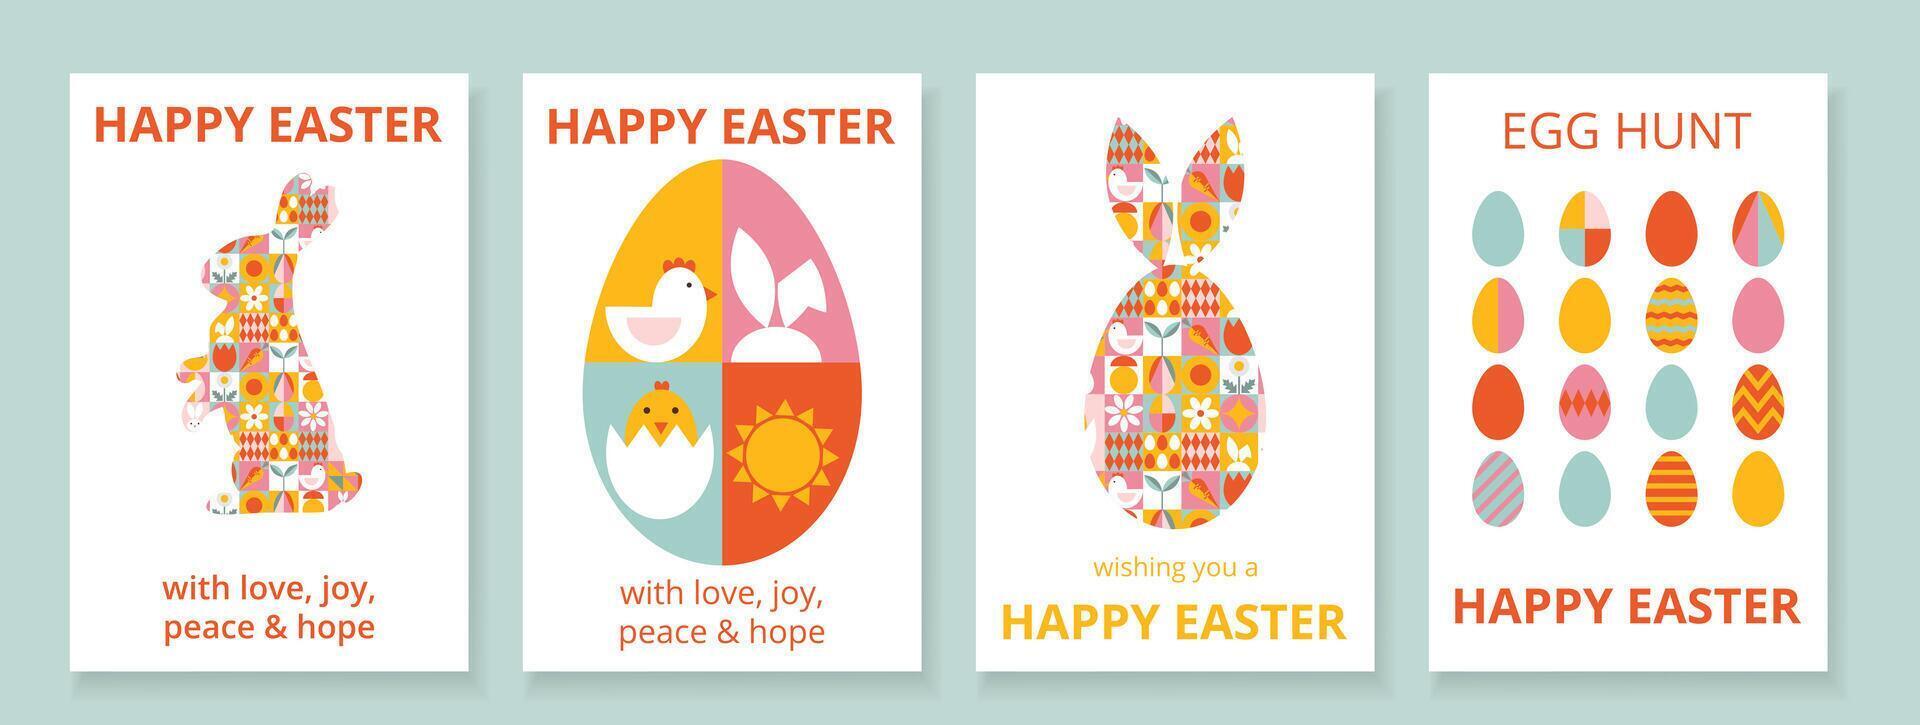 4 geometric greeting cards set for Happy Easter with typography. Trendy design from simple forms. Colorful eggs, bunny, sun, nestling, chicken. Bauhaus style. Templates for poster, promotion, banner vector